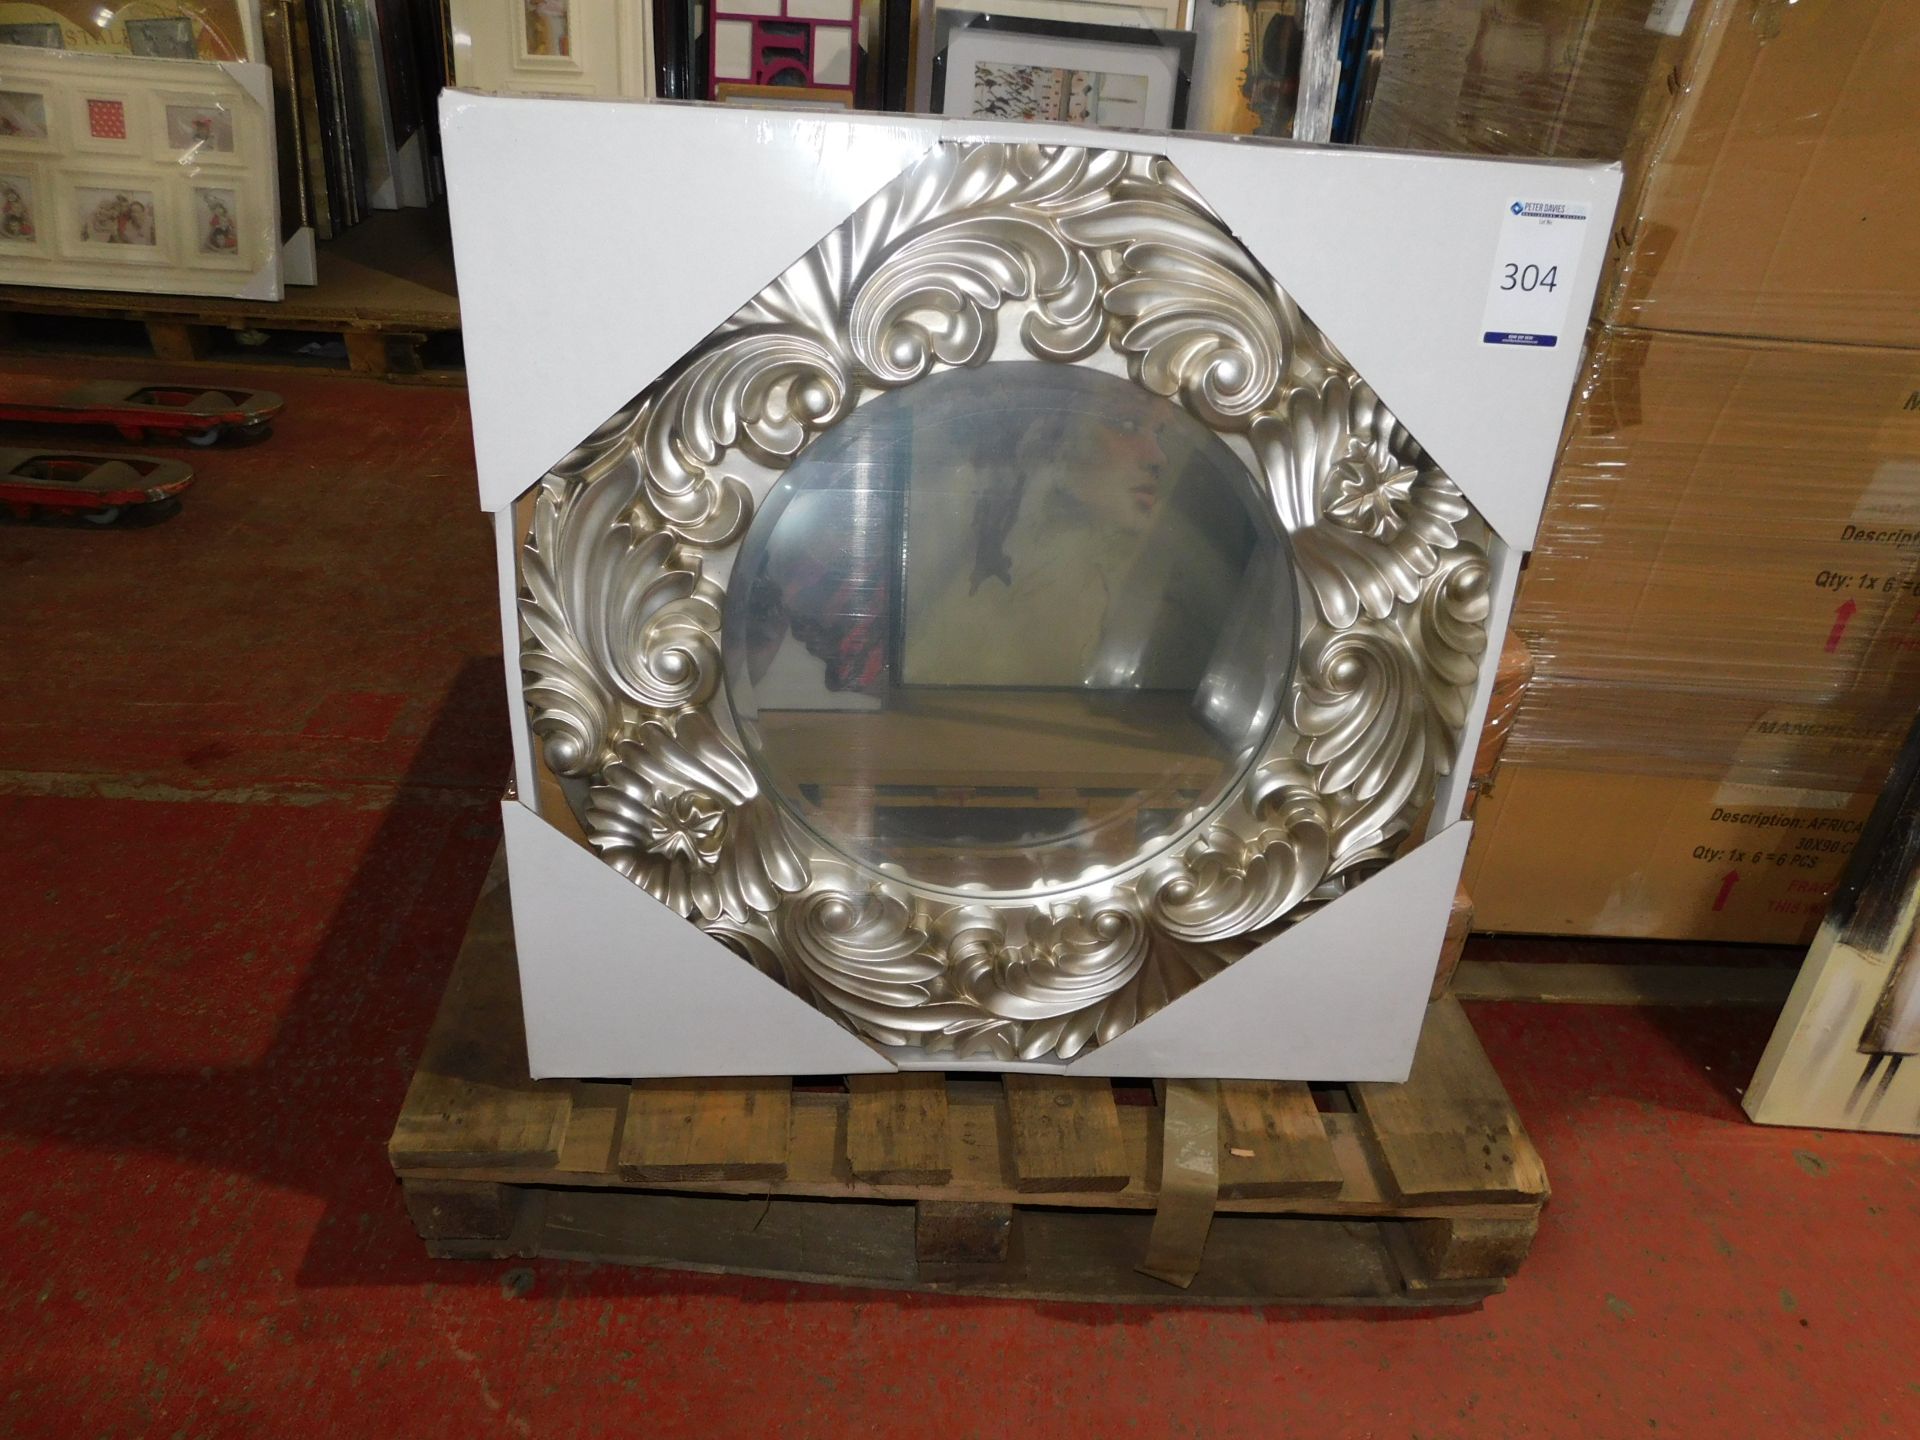 6 Silver Round Ornate Mirrors (Collection – Friday 25th, Tuesday 29th or Wednesday 30th May – By